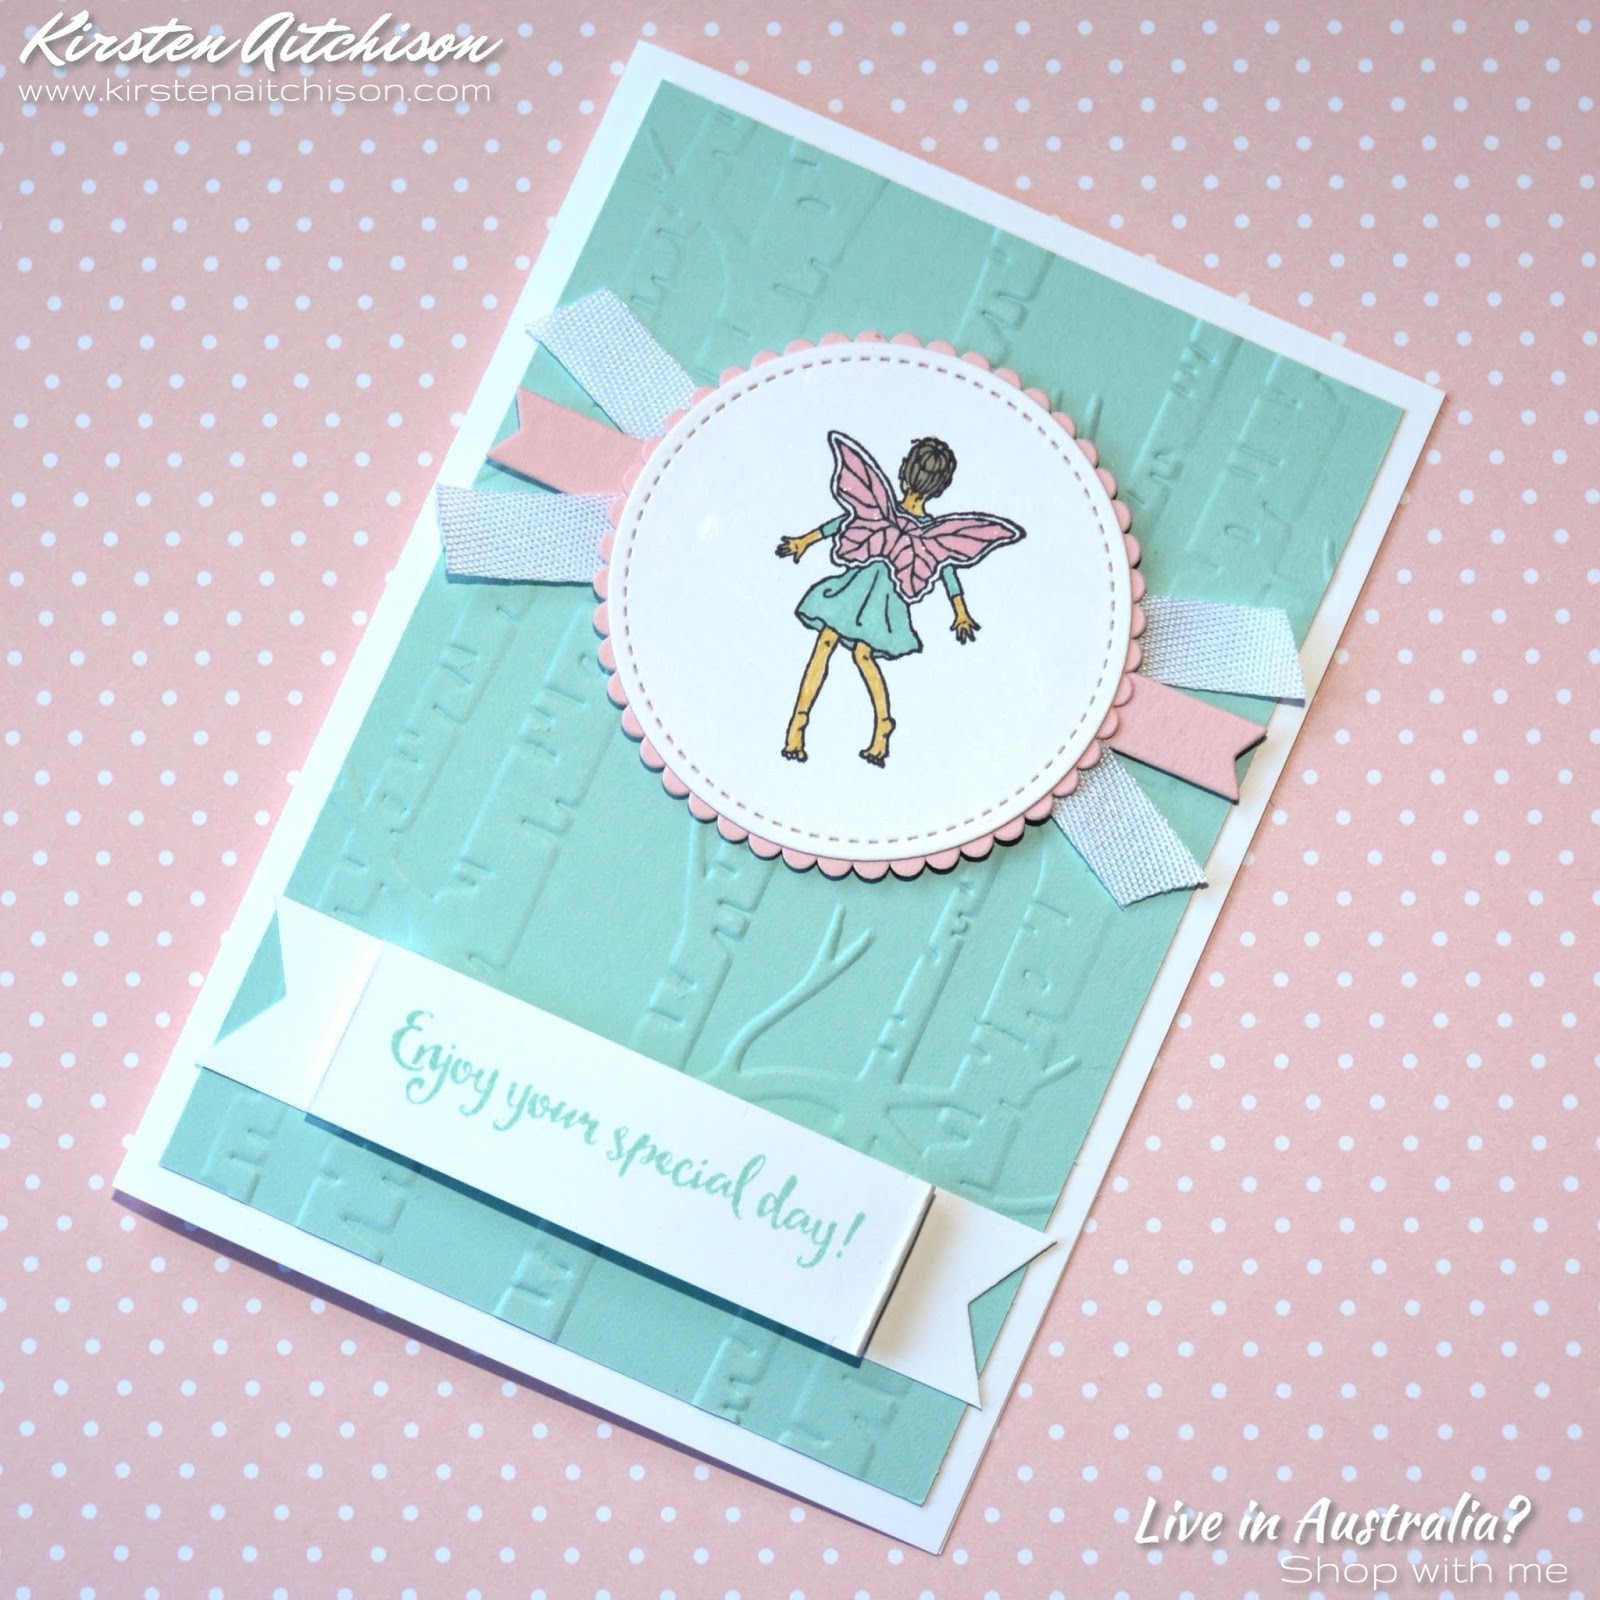 Kirsten Aitchison: Handmade with Love: Crazy Crafters Blog Hop with ...